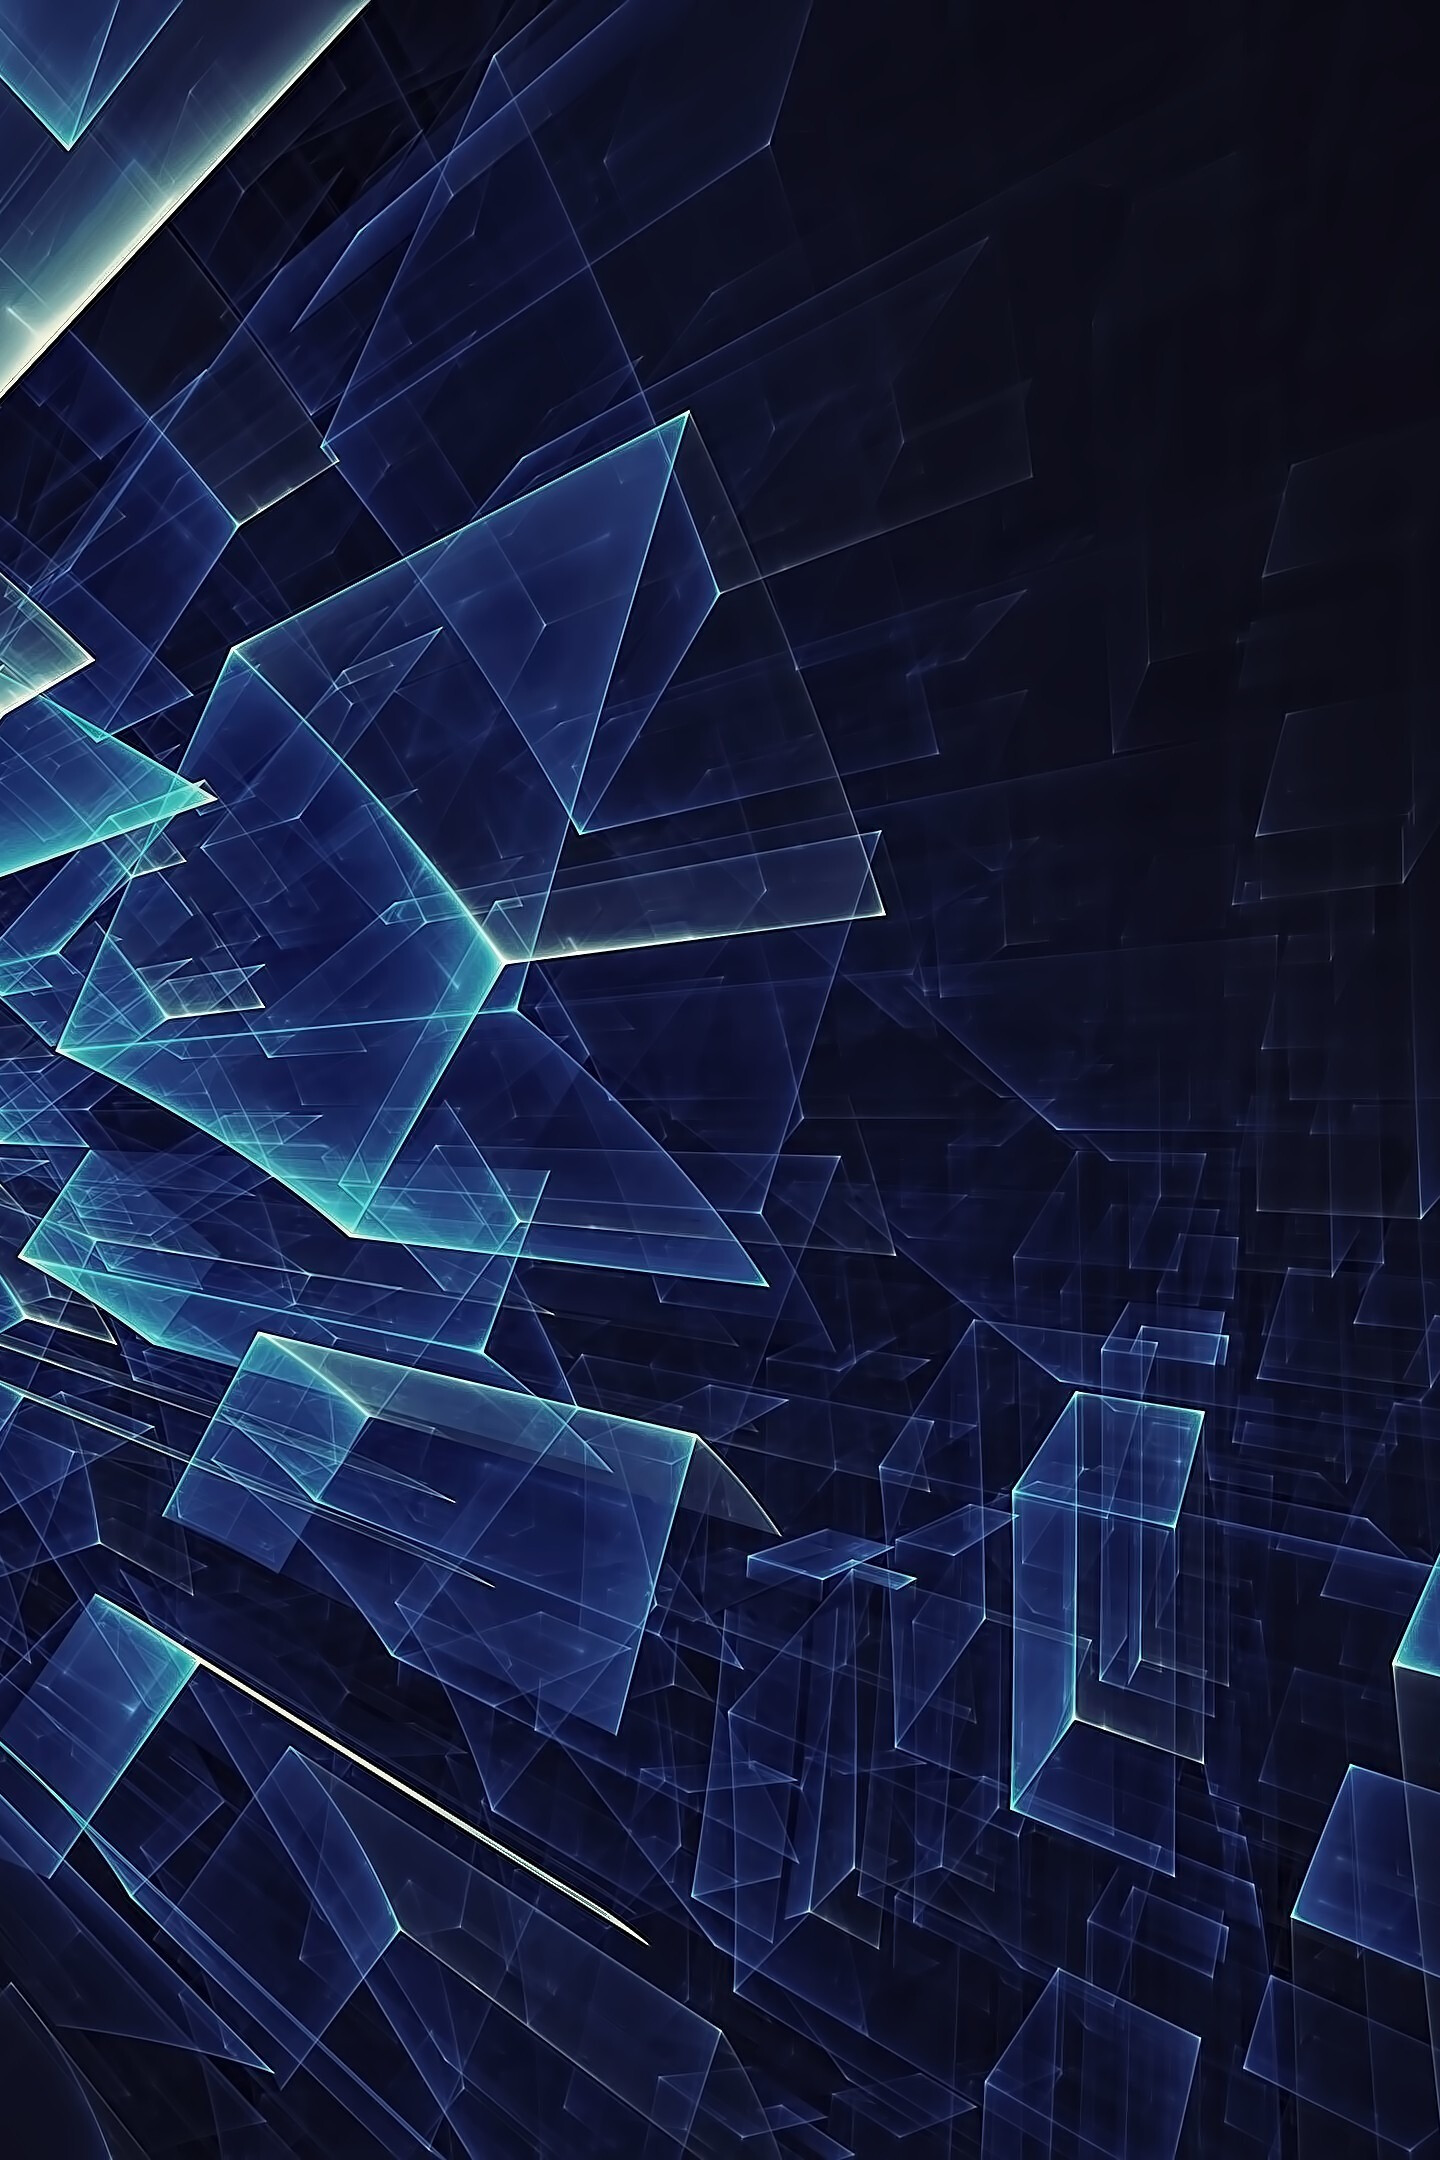 Geometry: Abstract, Transparent figures, Dark tone, Polyhedrons. 1440x2160 HD Wallpaper.